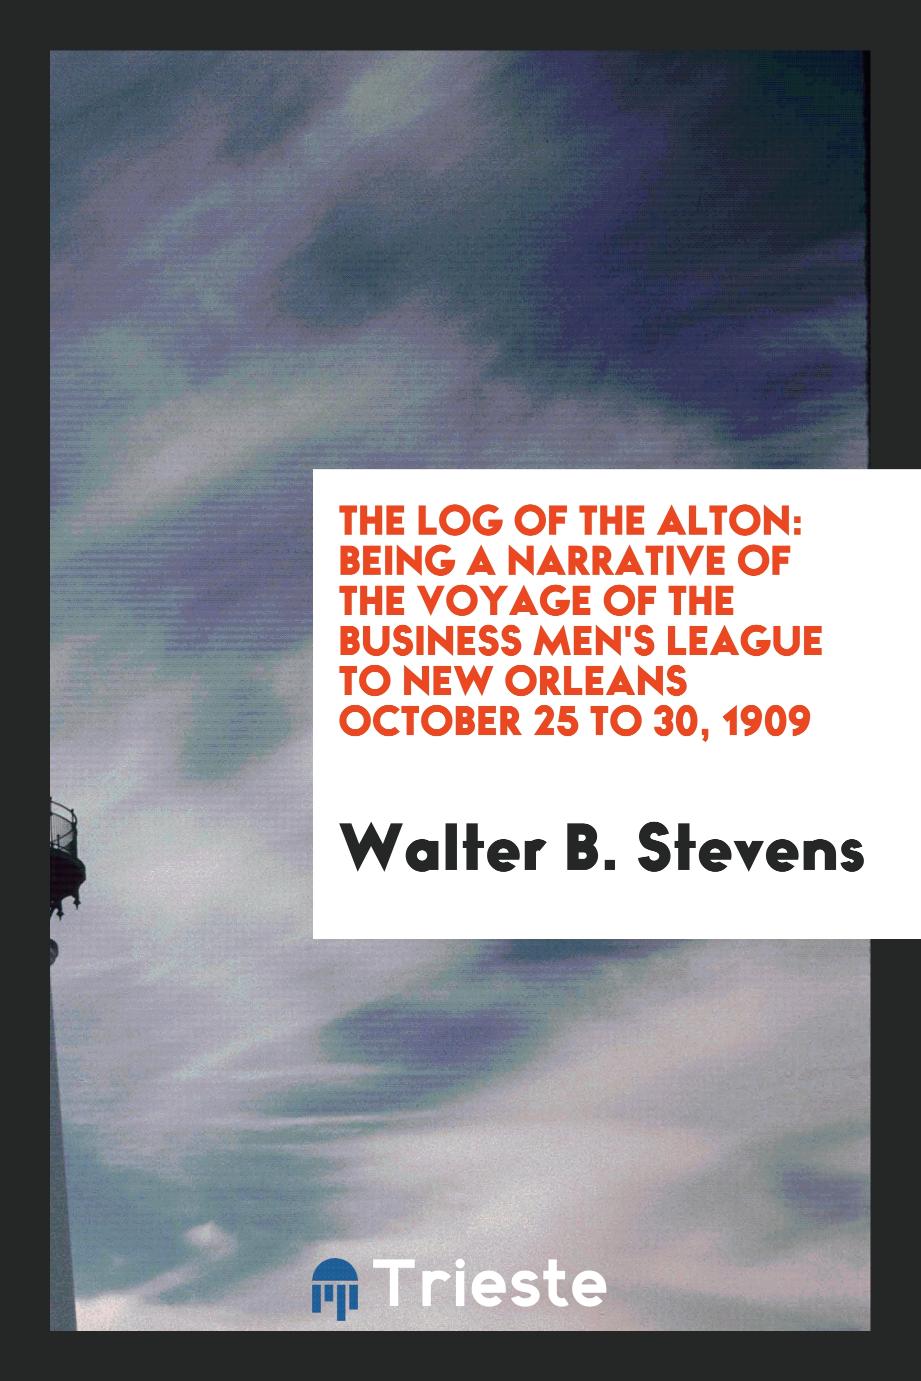 The Log of the Alton: Being a Narrative of the Voyage of the Business Men's League to New Orleans October 25 to 30, 1909